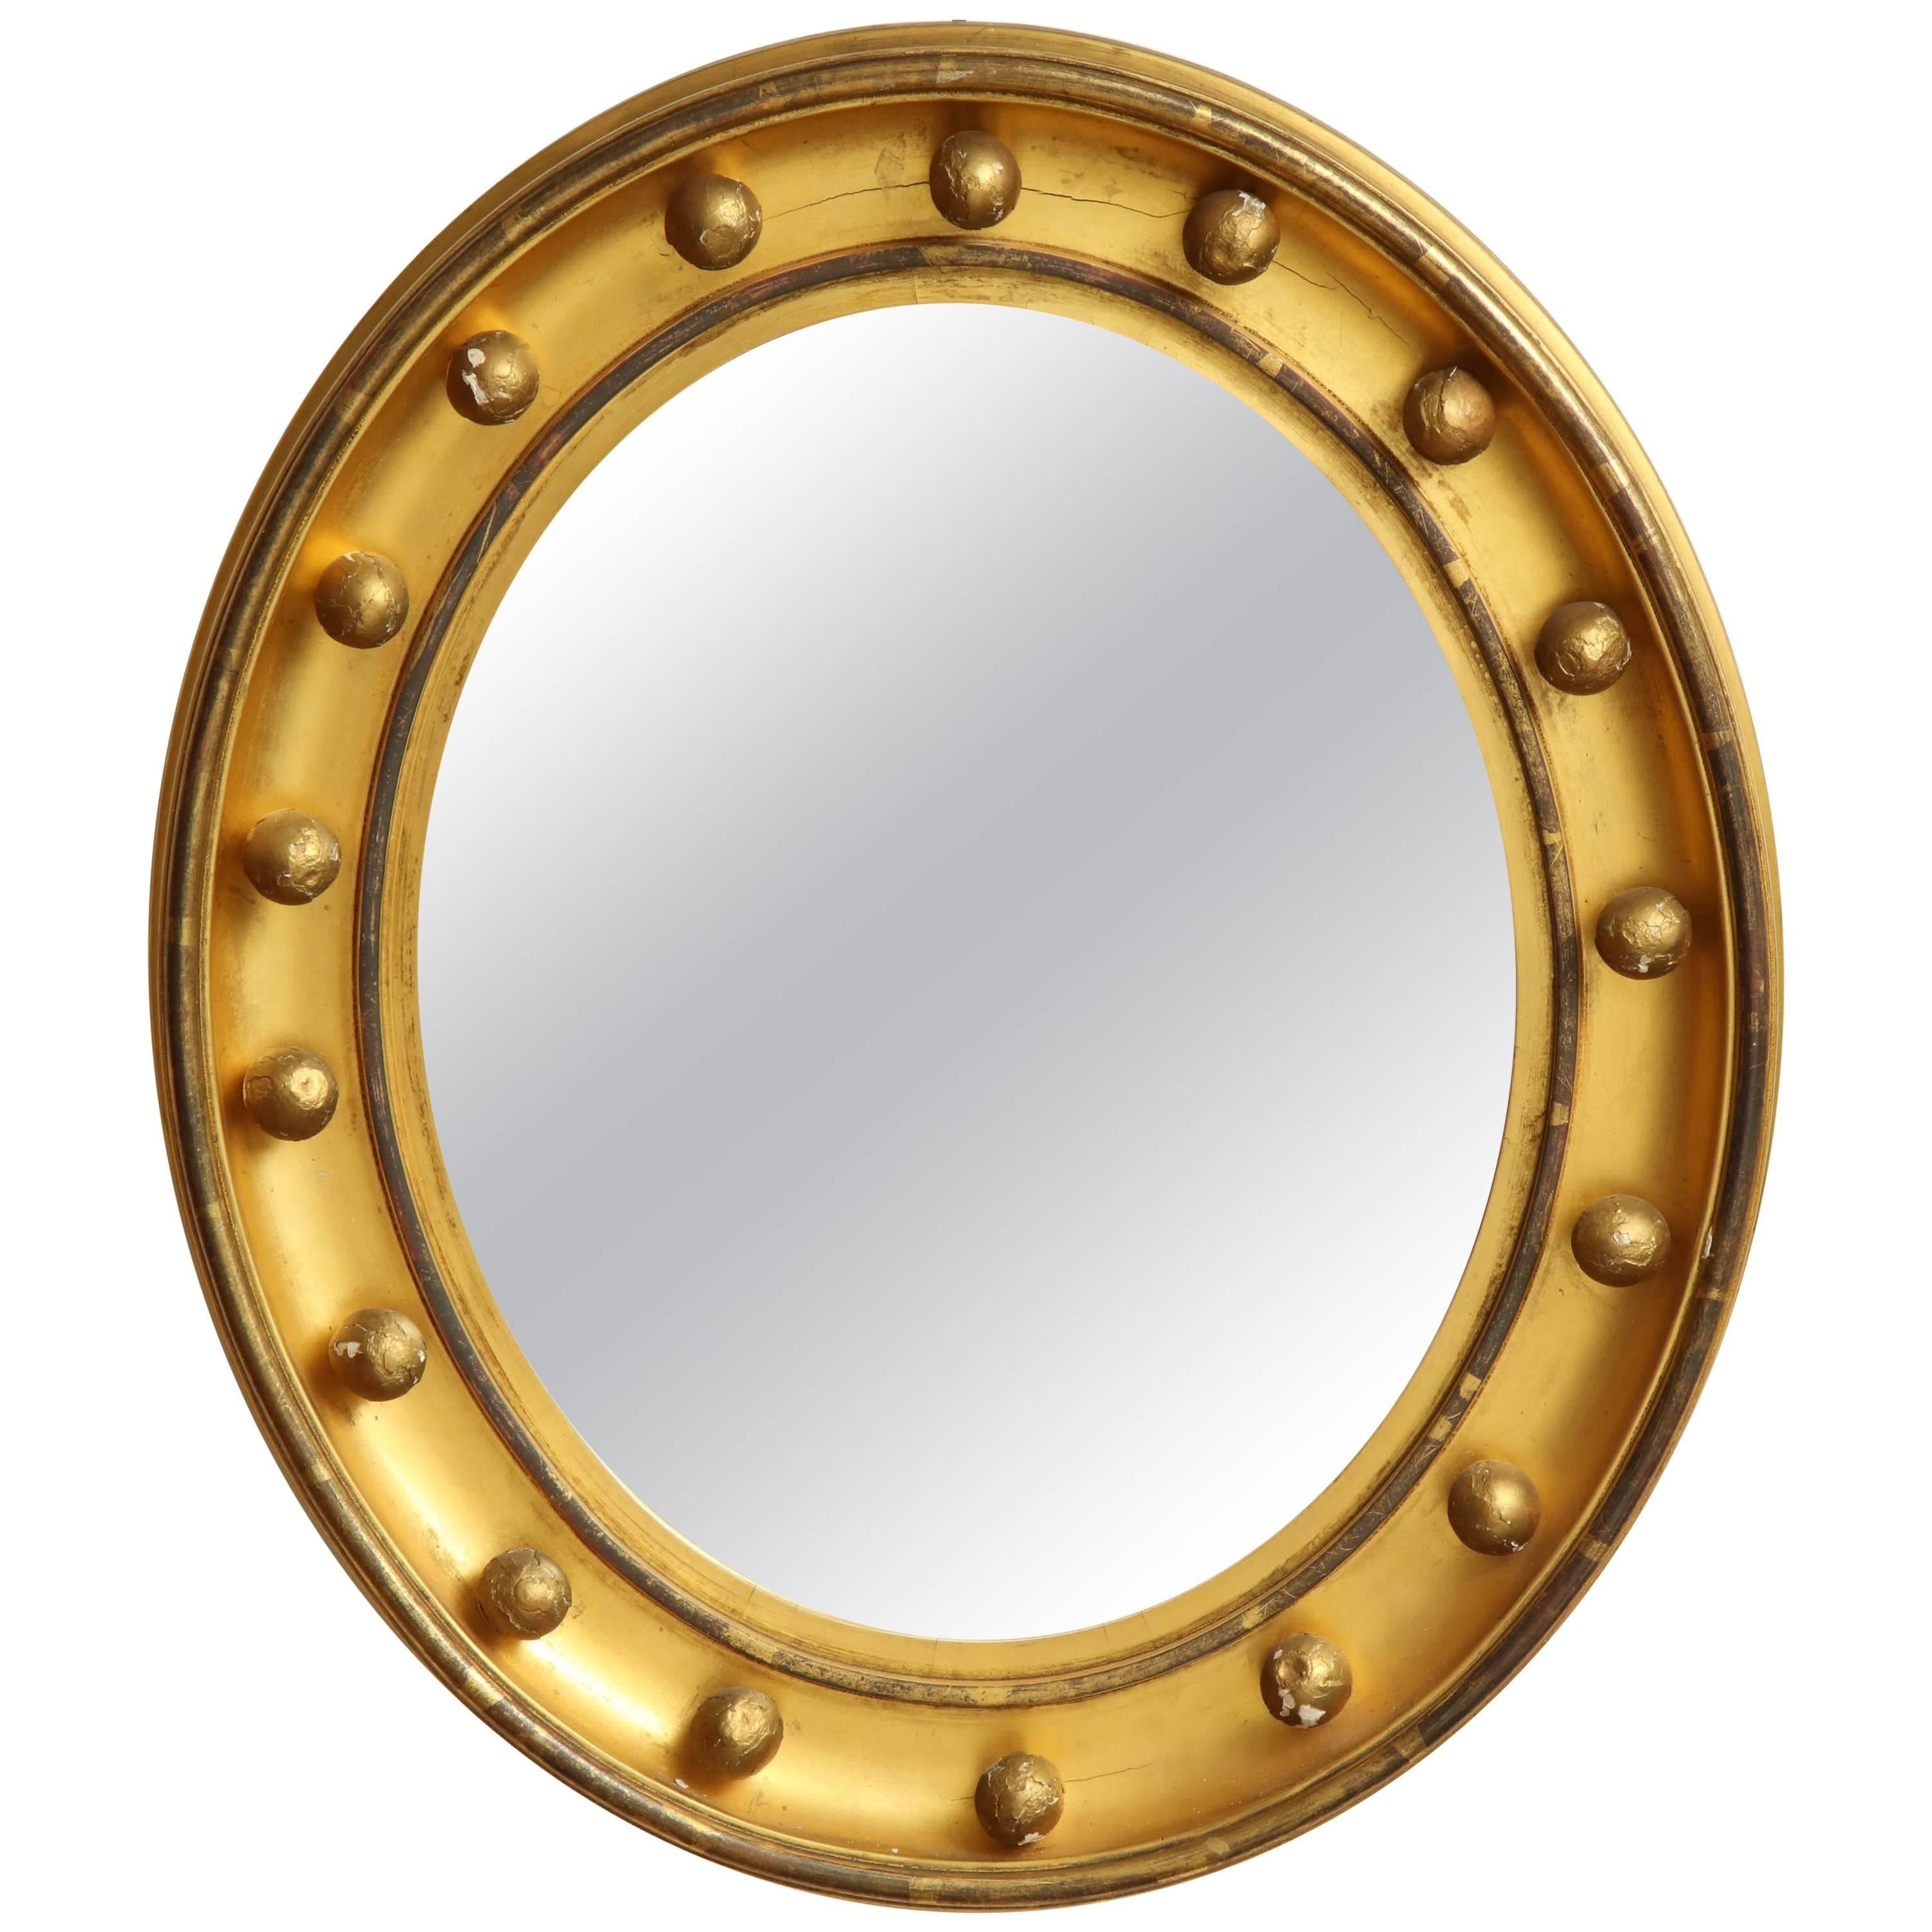 19th Century English, Glided, Beveled Mirror For Sale